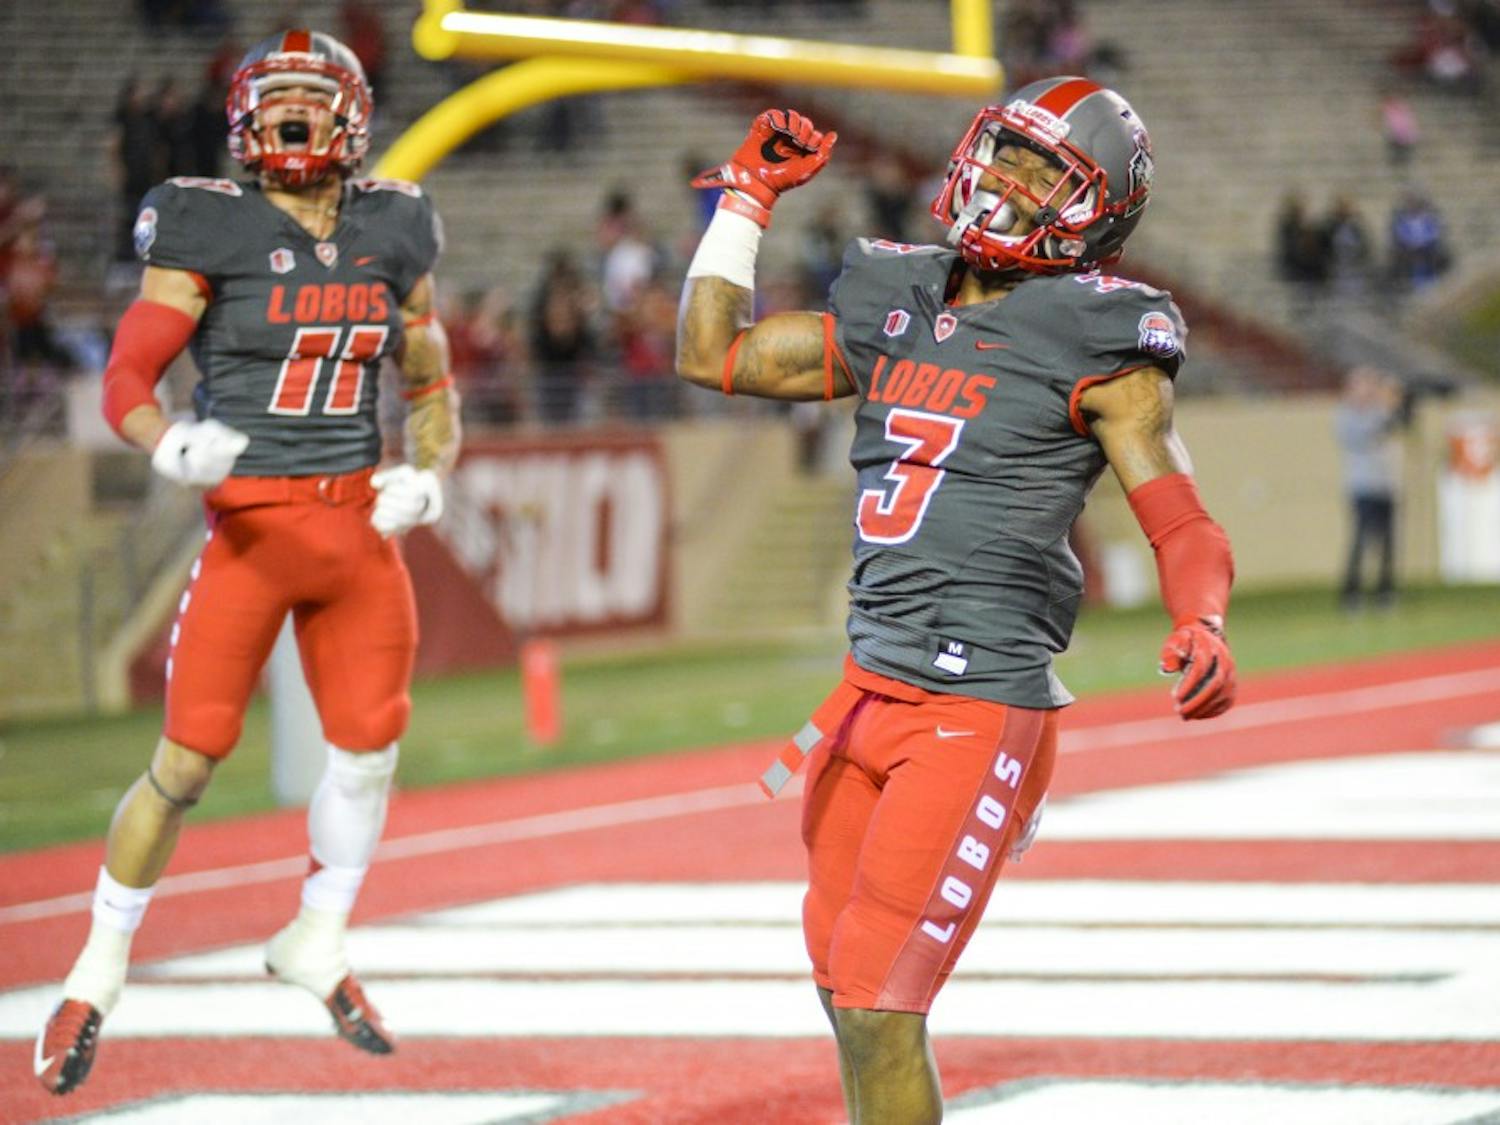 Junior running back Richard McQuarley celebrates in the Lobo’s end zone during their game against ULM at University Stadium on Sunday, Oct. 23, 2016. The Lobos beat Hawaii University 28-21 this past Saturday.